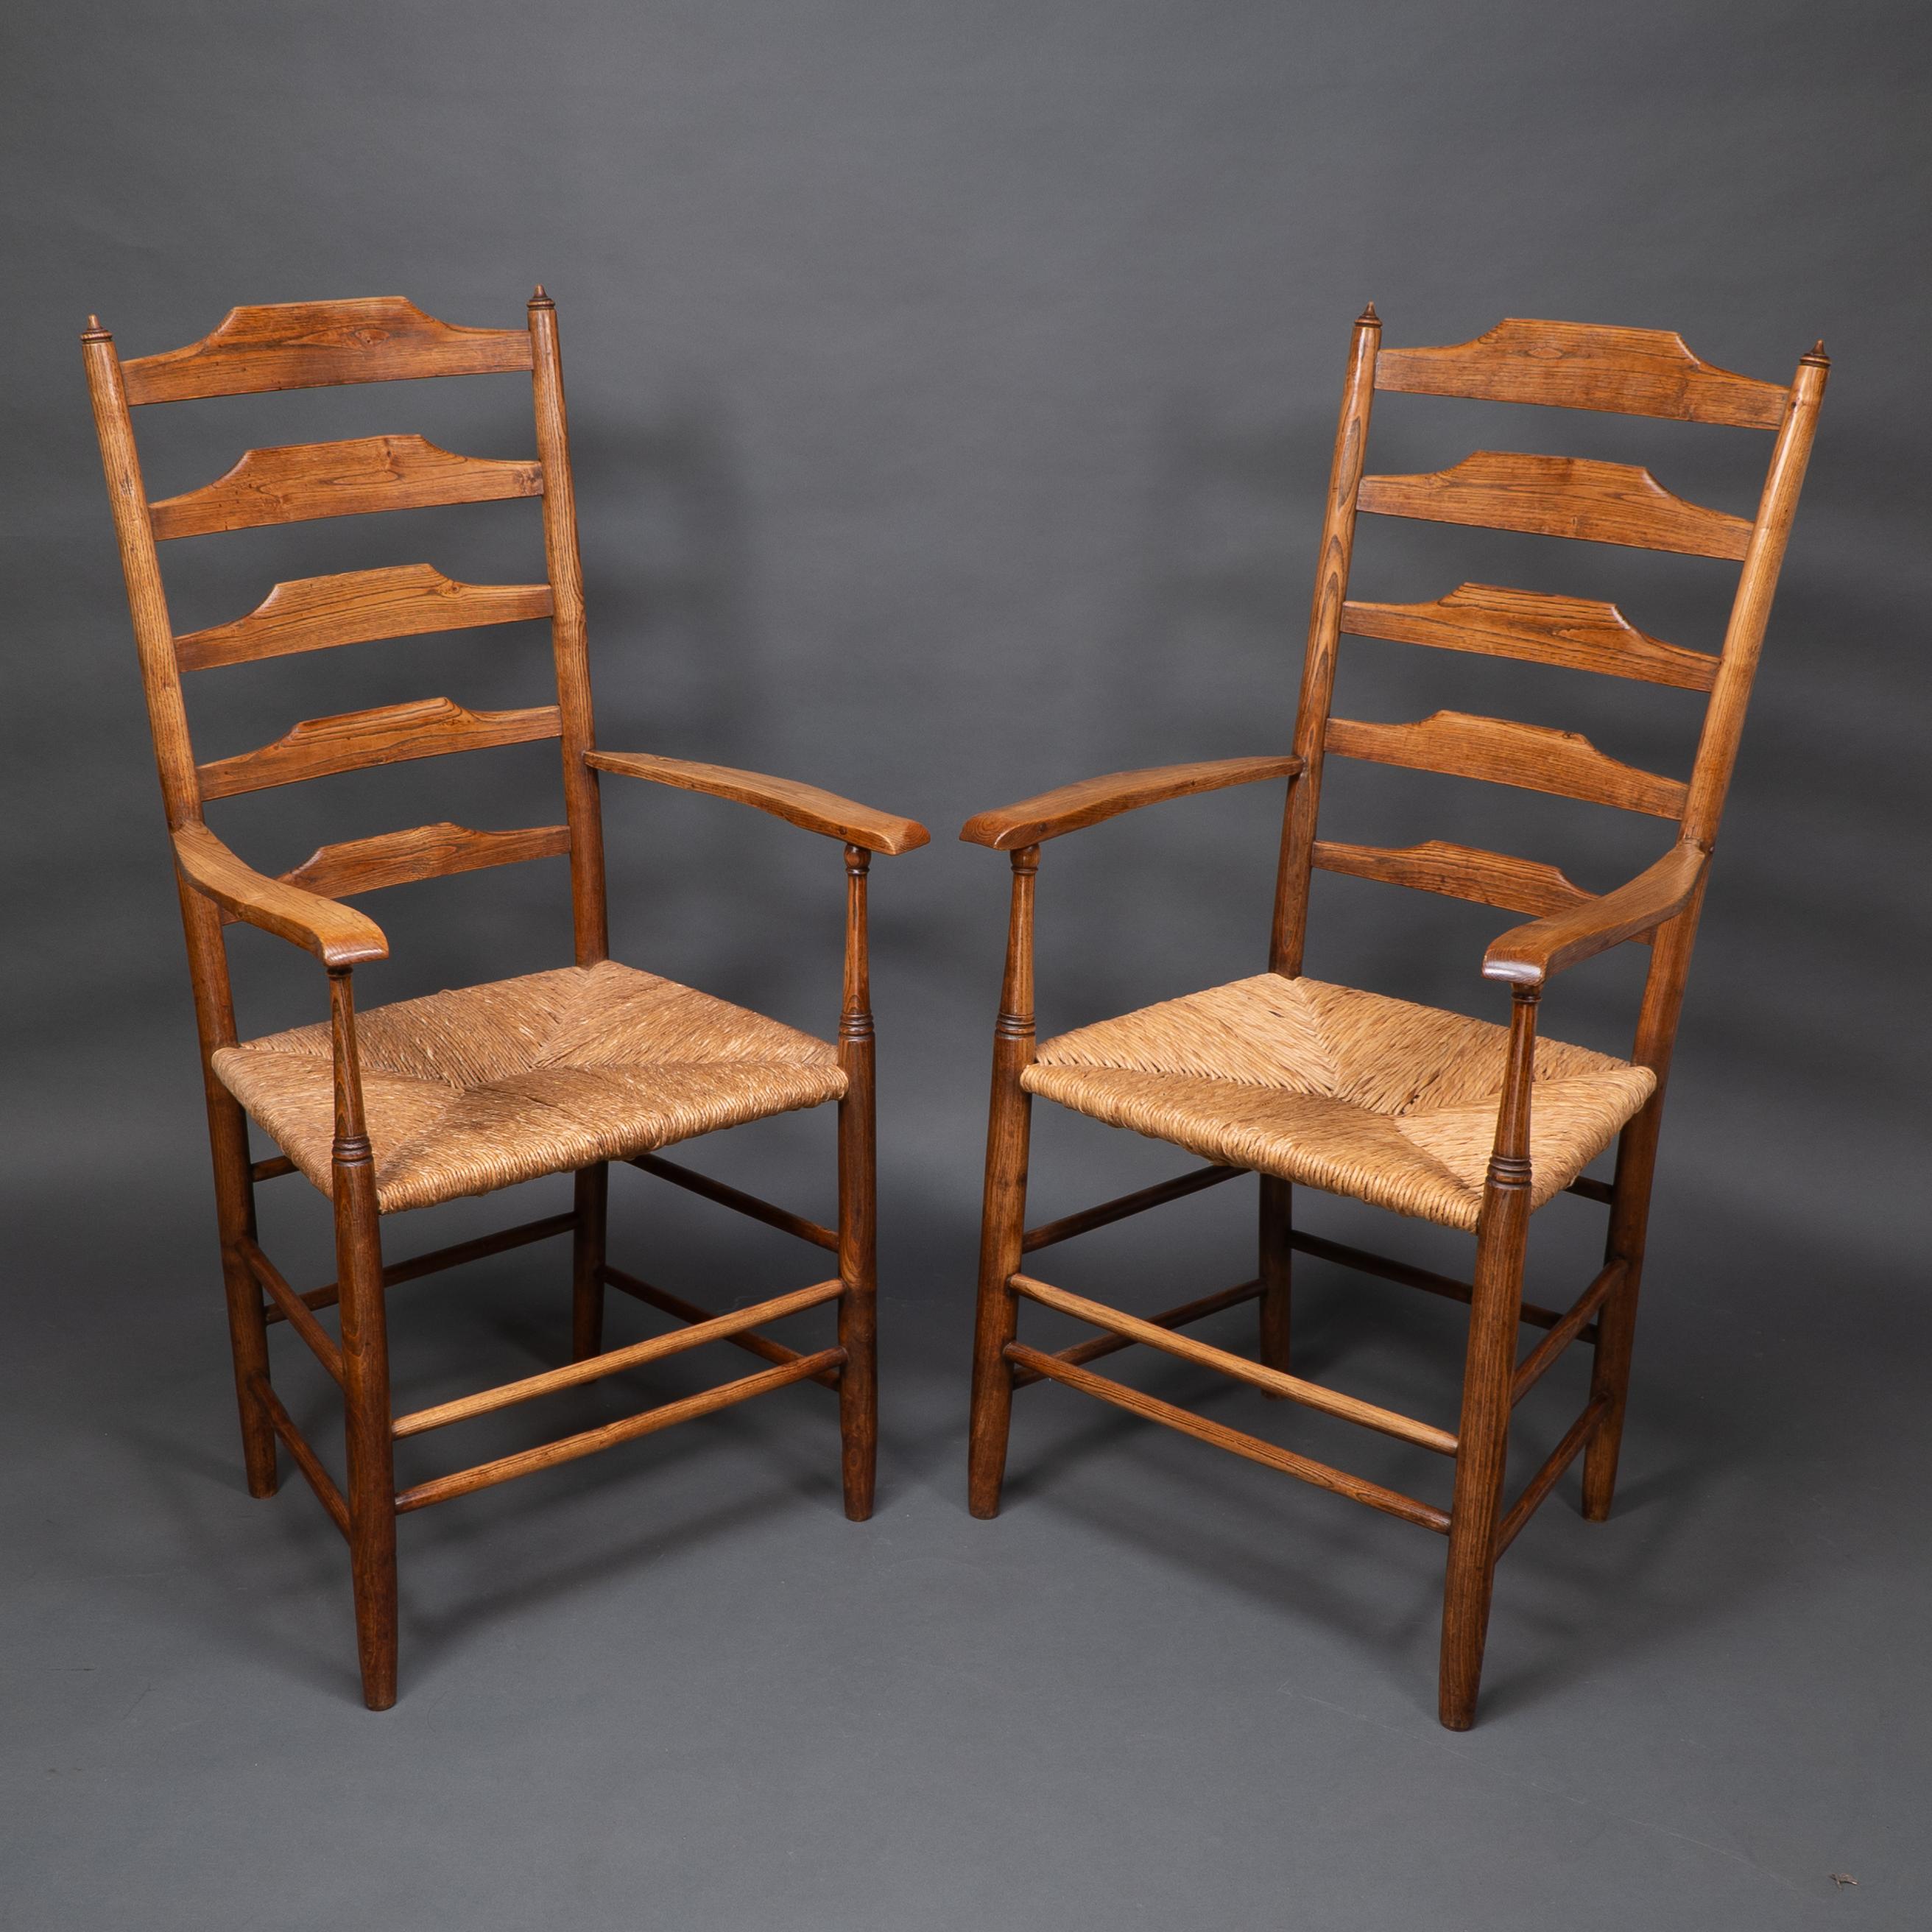 Philip Clissett. A fine set of four early Arts and Crafts ash ladder back armchairs with pegged joints. Slightly larger than usual, beautifully made with sculptured ladders and all in wonderful original condition.All four armchairs are shown on the